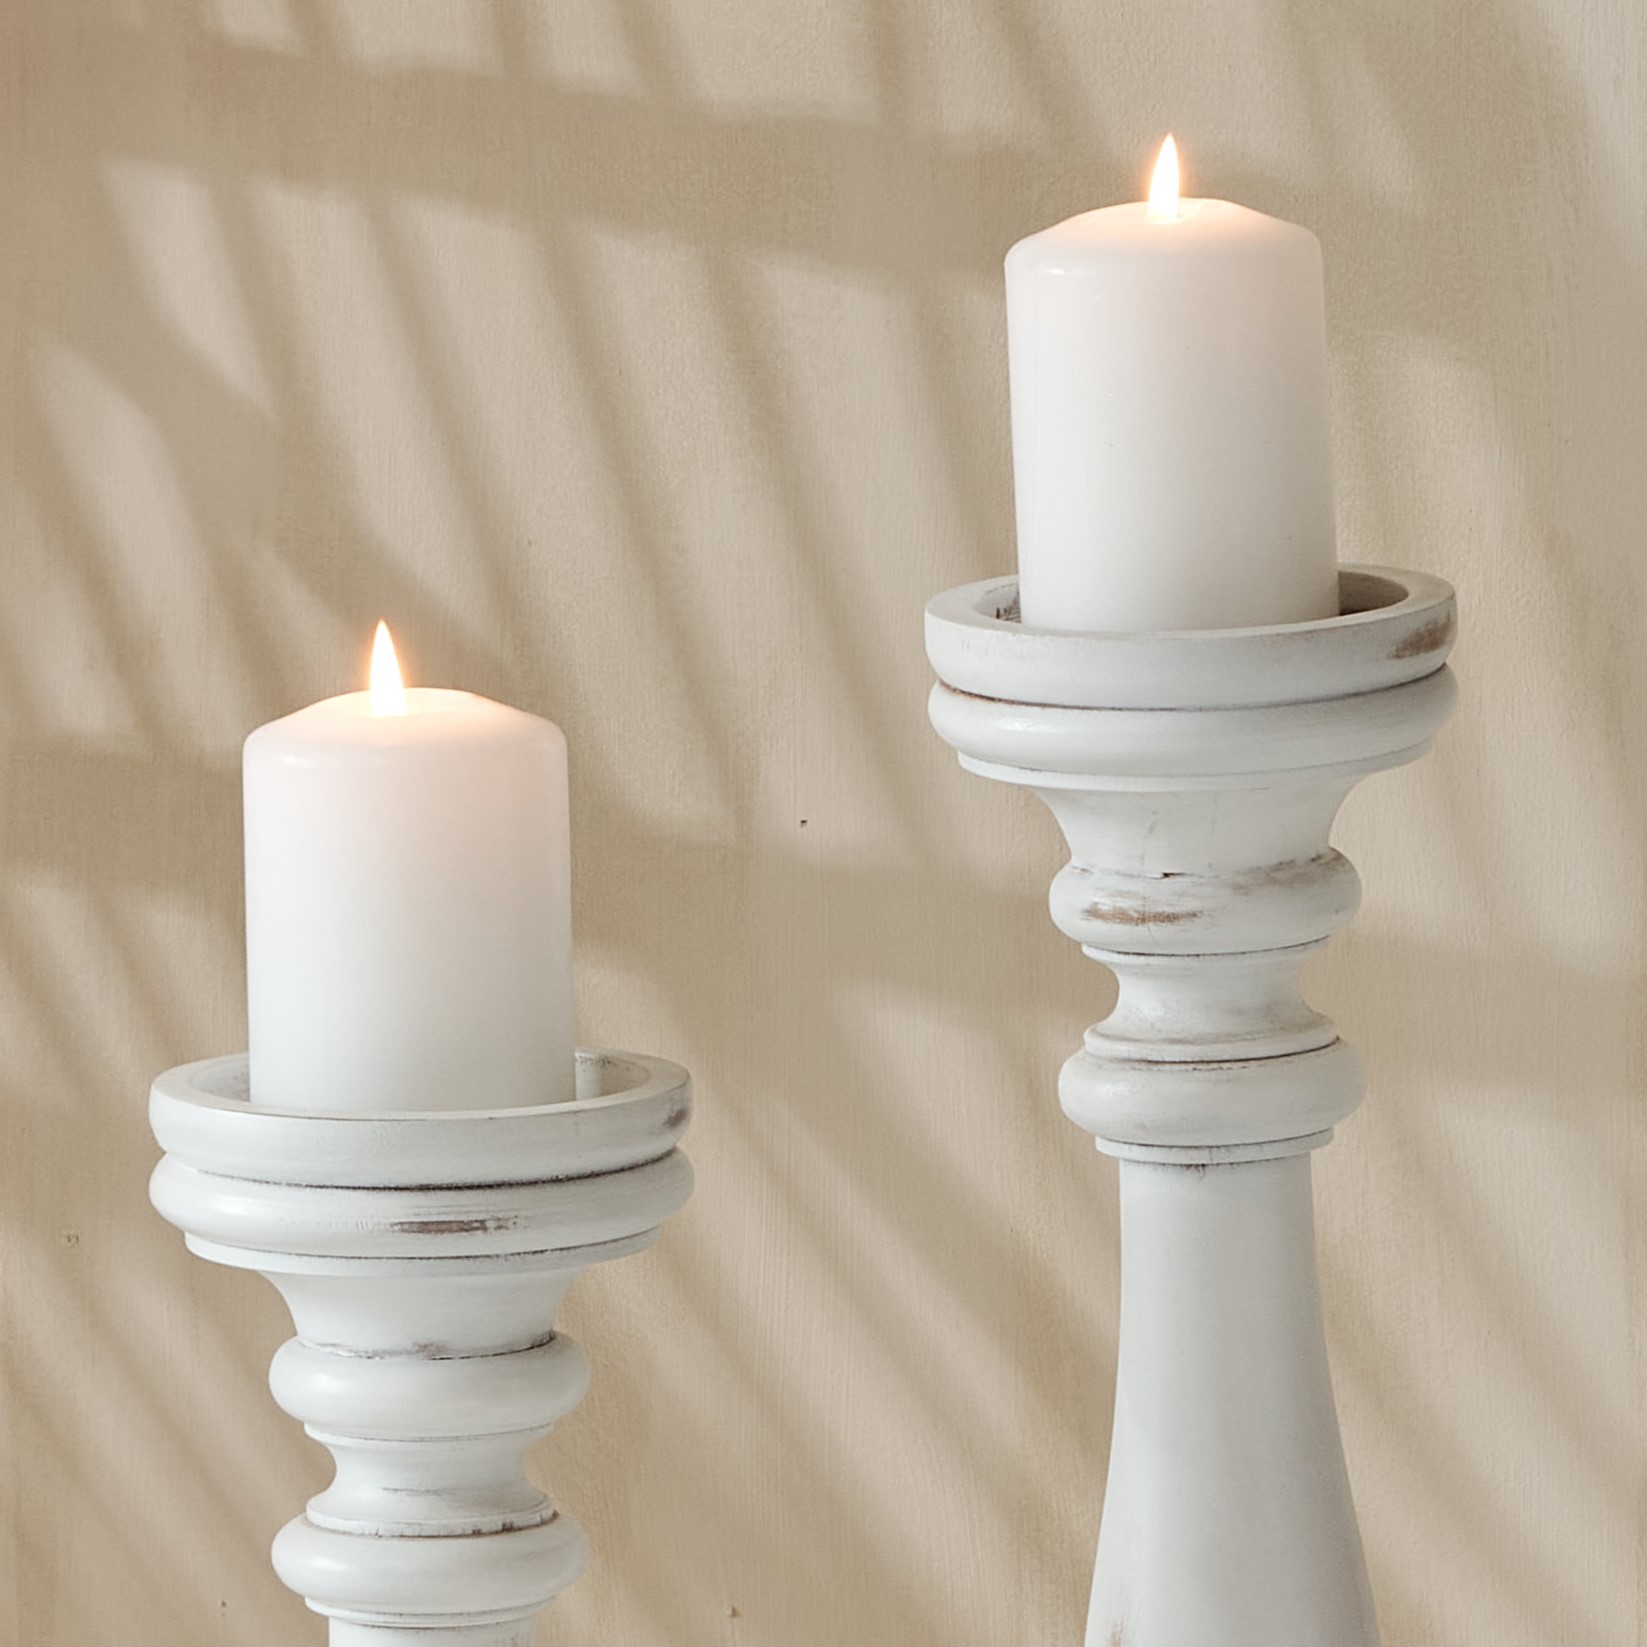 2 tall white wooden candlesticks with white pillar candles